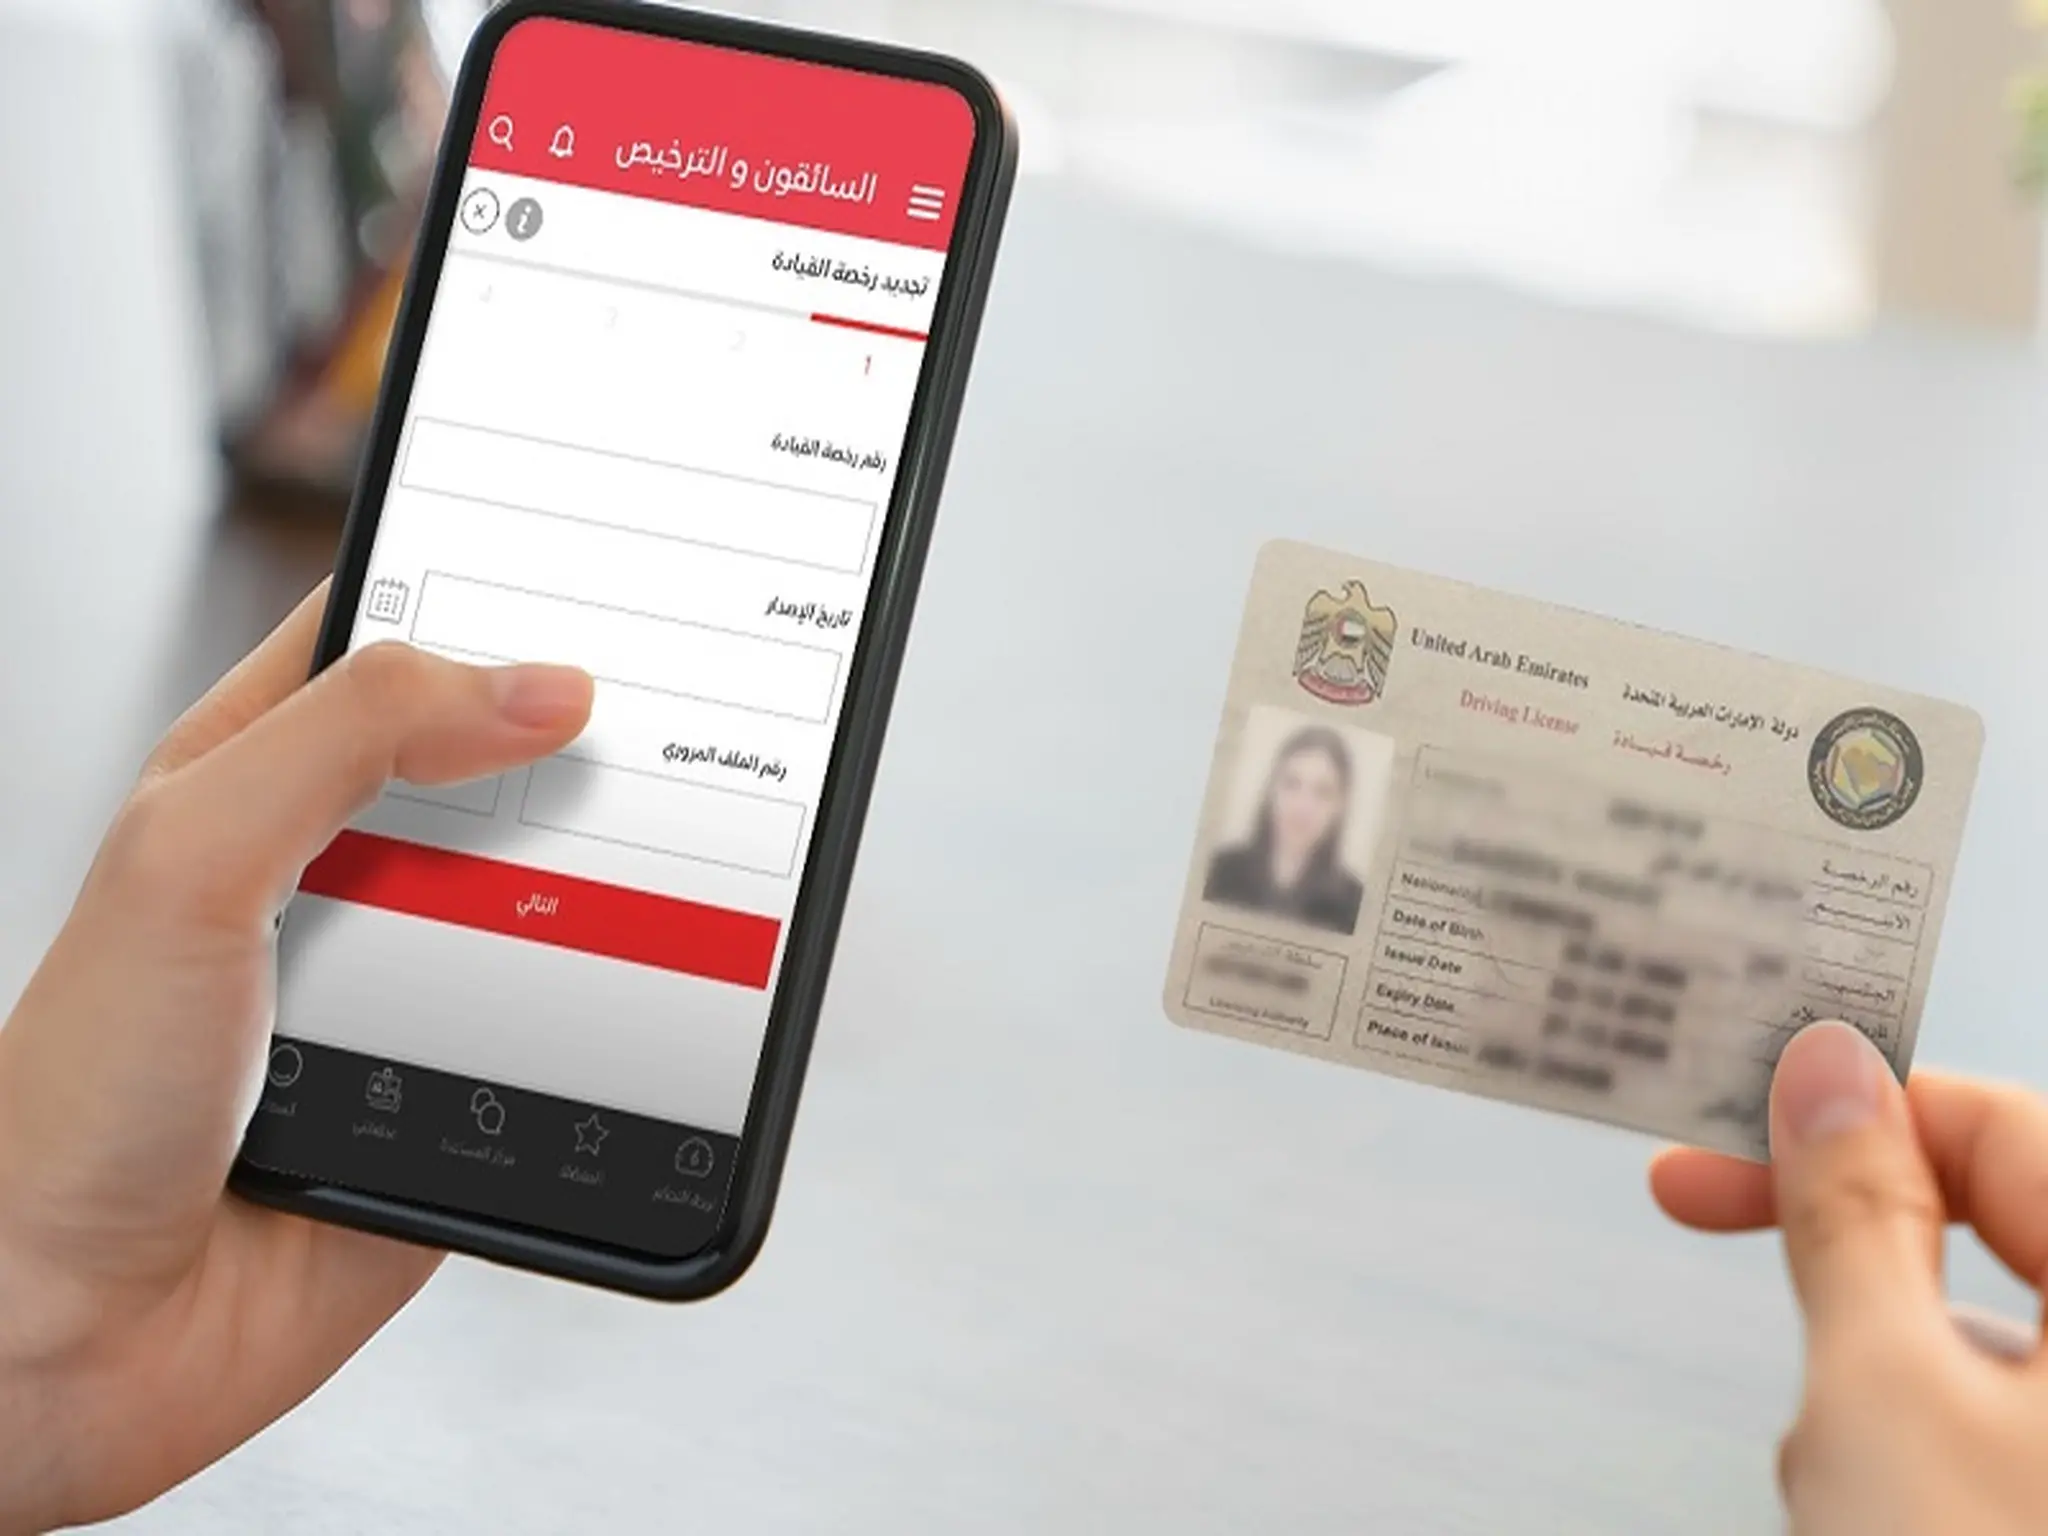 Recognizing driving licenses from 43 countries in the UAE and allowing their replacement